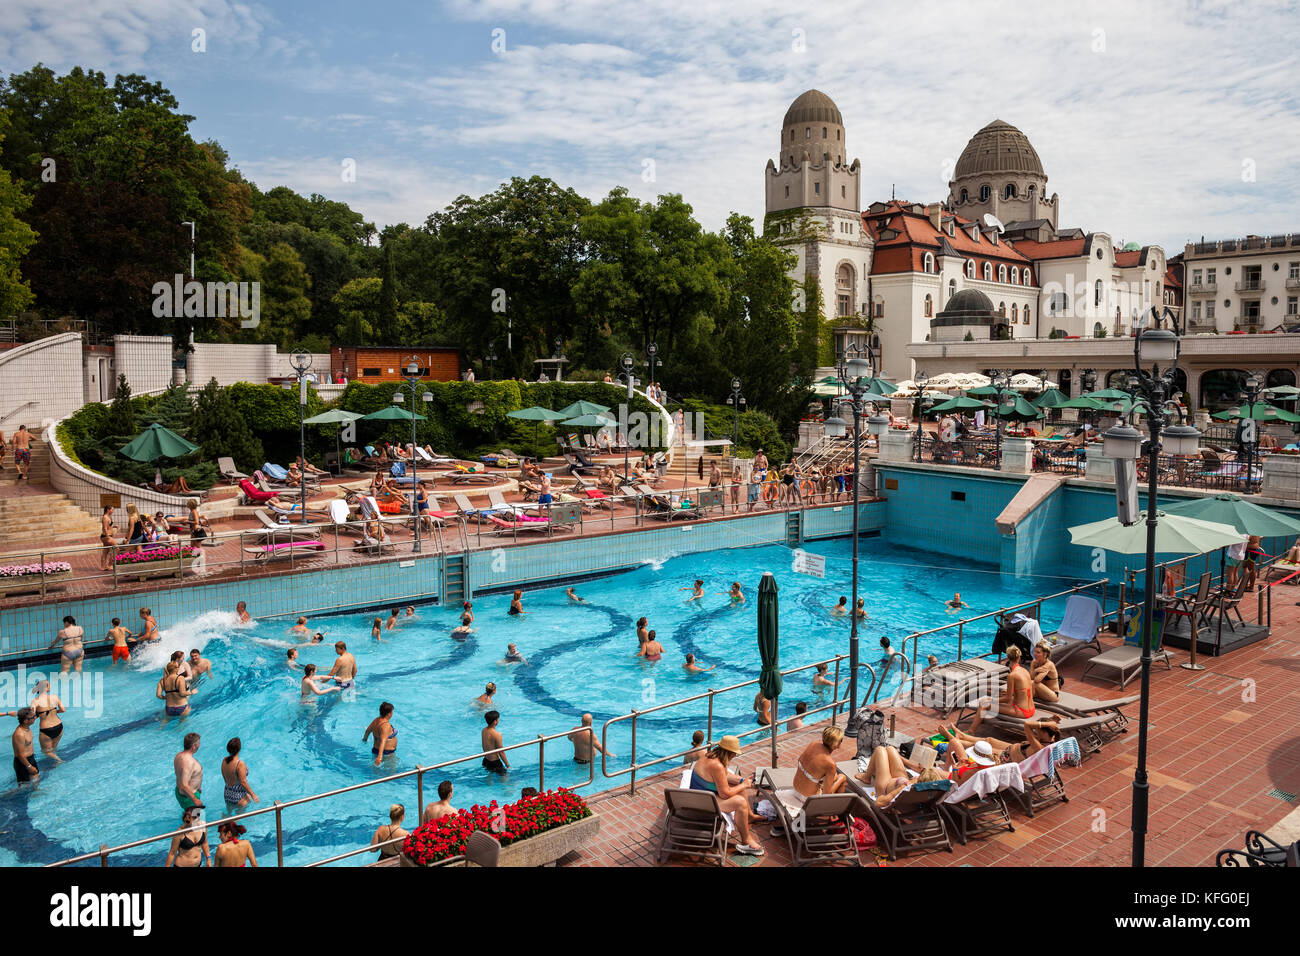 Hungary, Budapest, people relaxing at Gellert Thermal Baths and Swimming Pool complex Stock Photo